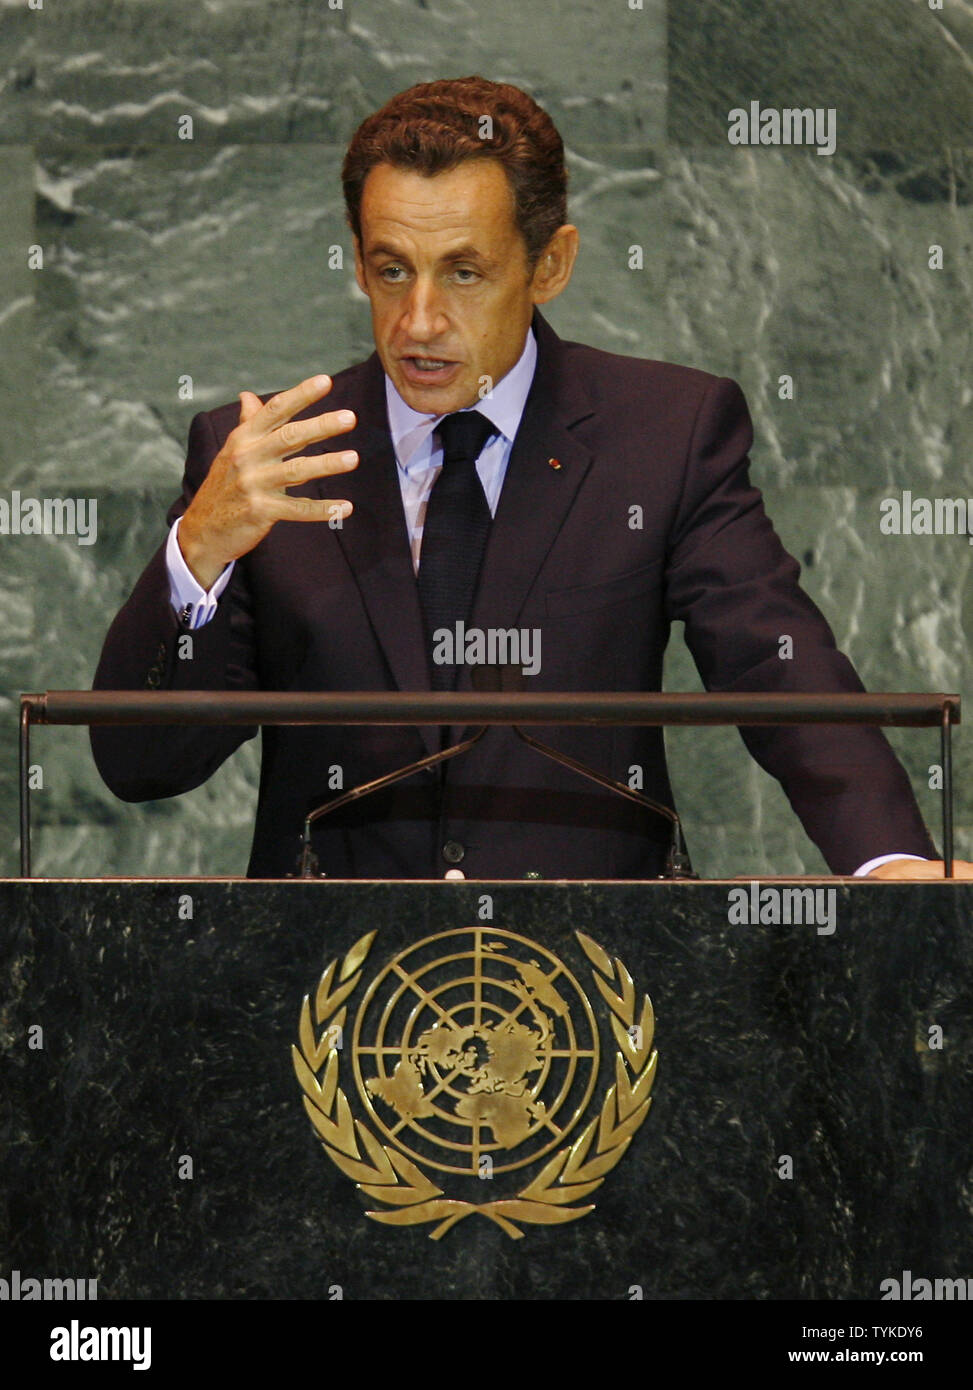 French President Nicolas Sarkozy speaks at the 64th United Nations General Assembly in the UN building in New York City on September 23, 2009.      UPI/John Angelillo Stock Photo